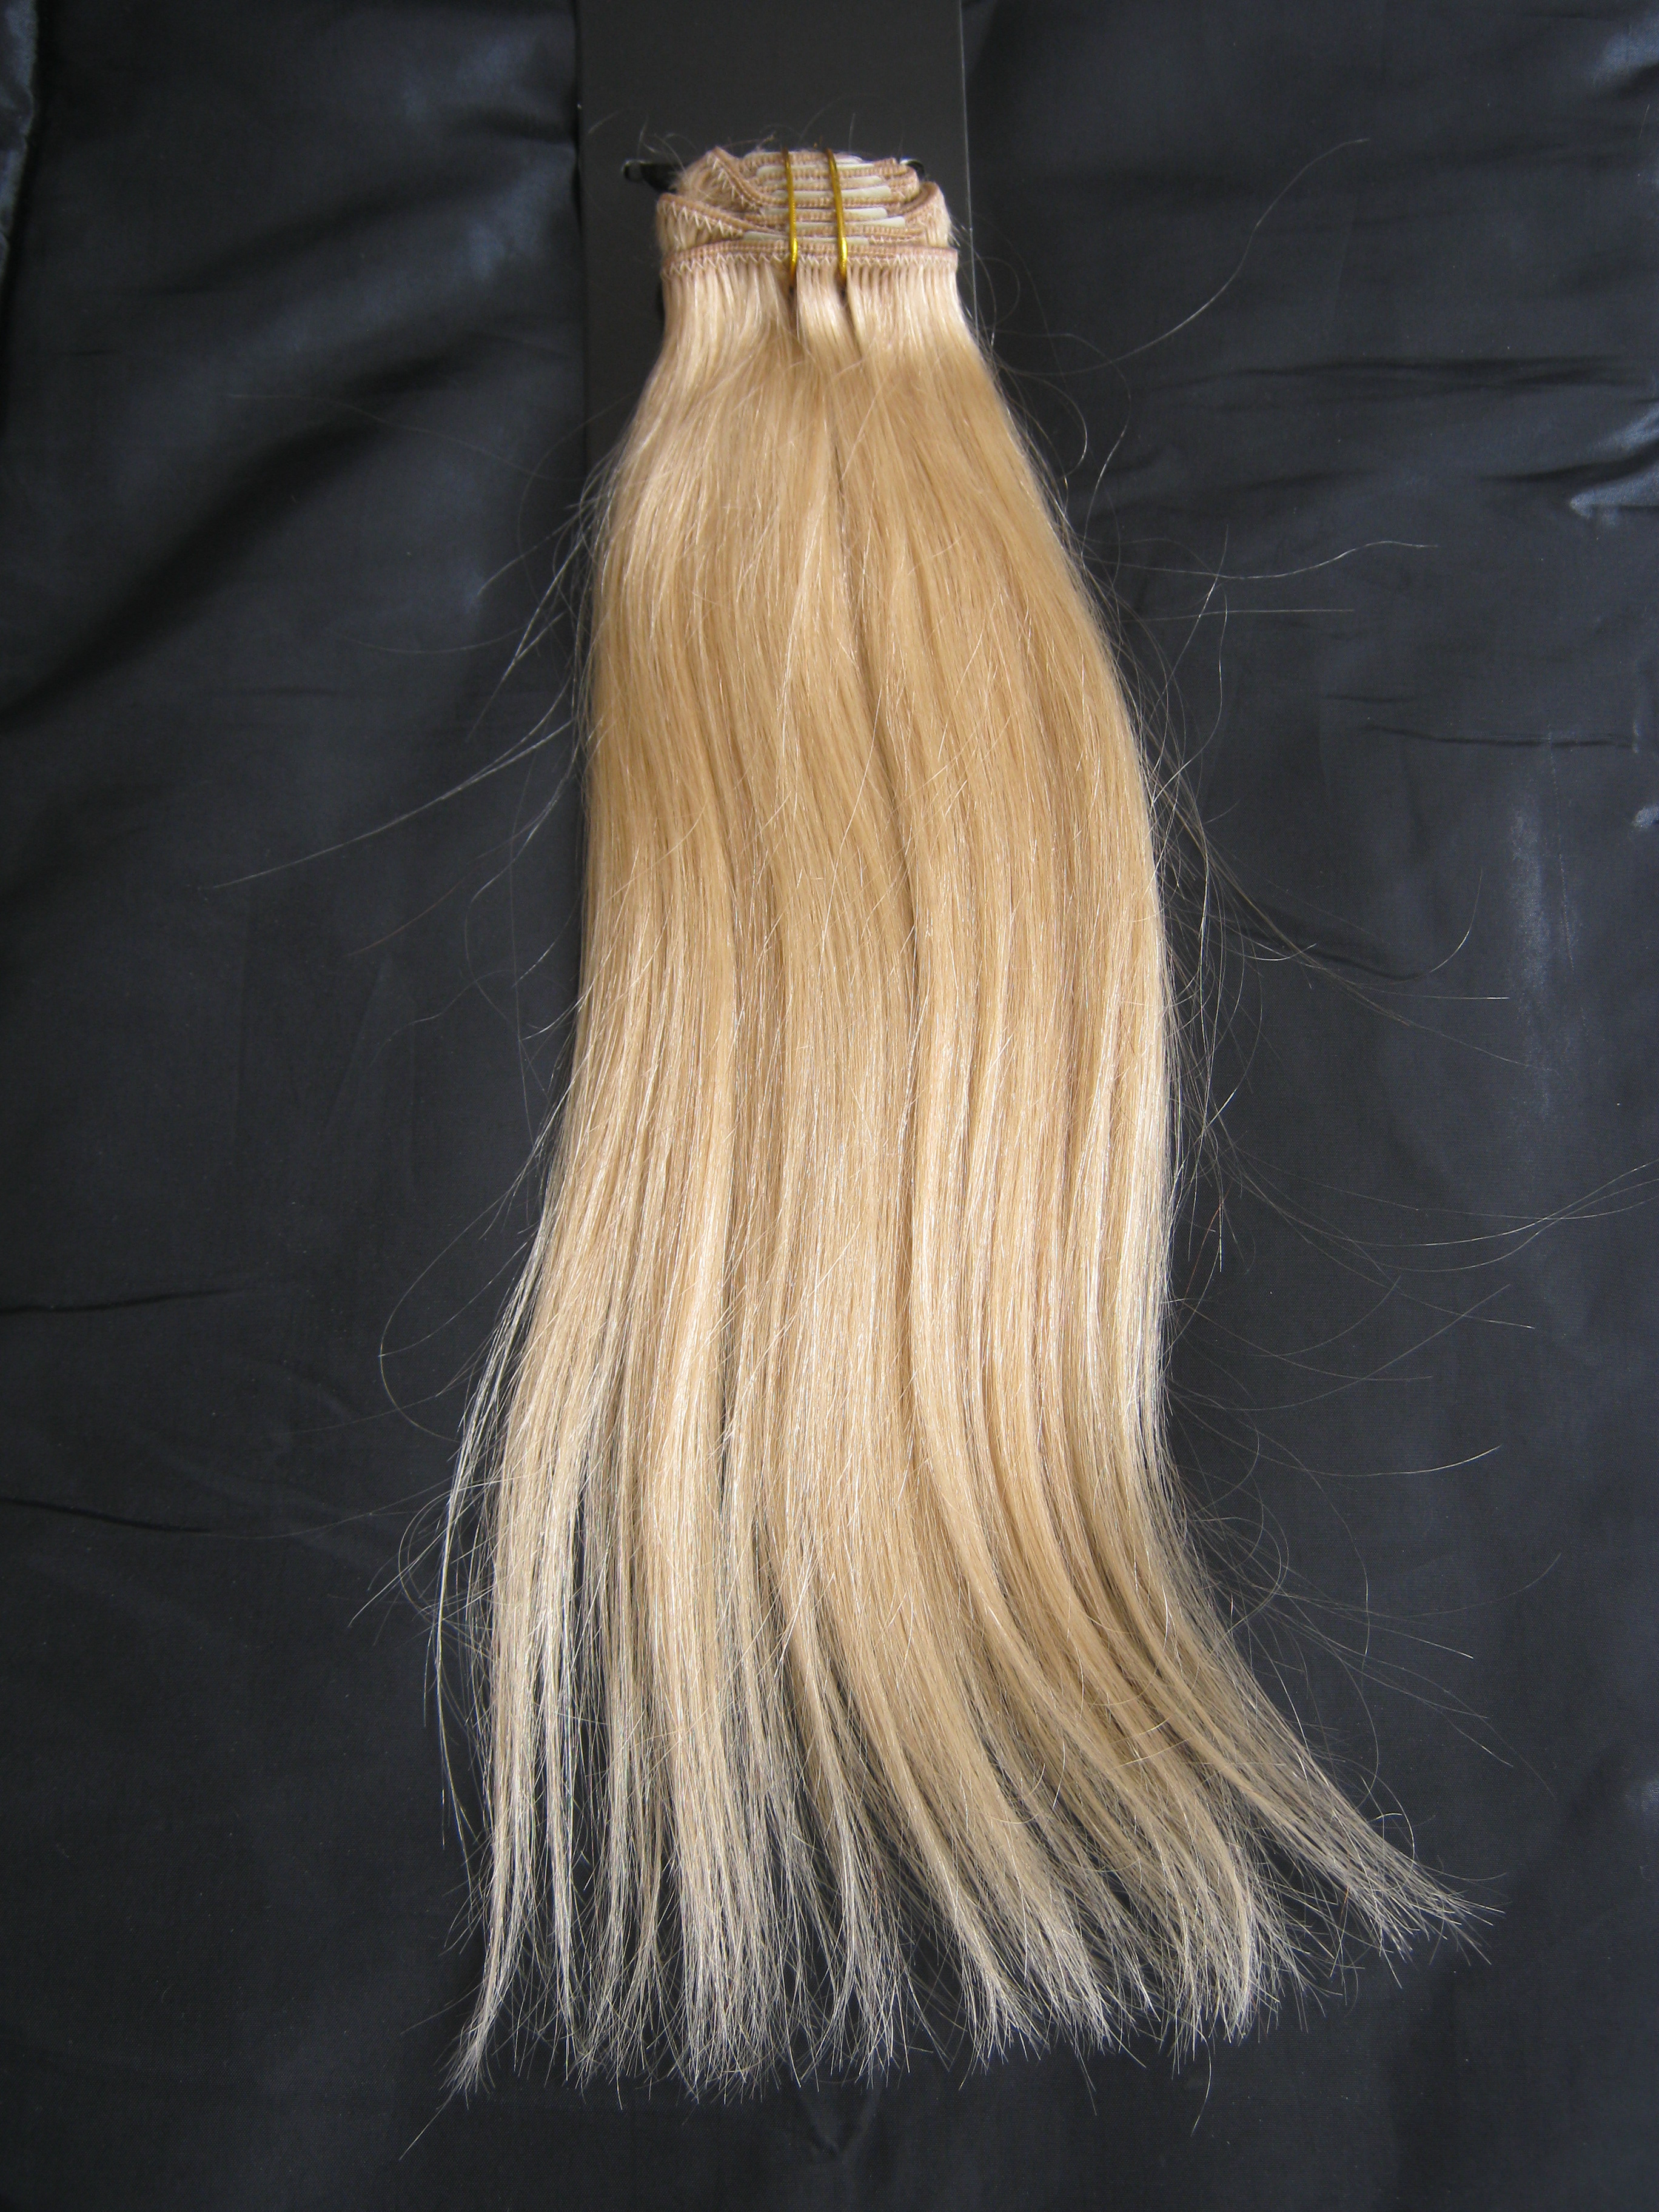 Halo Hair Extensions -Golden Blonde #24 Review - Steph Style